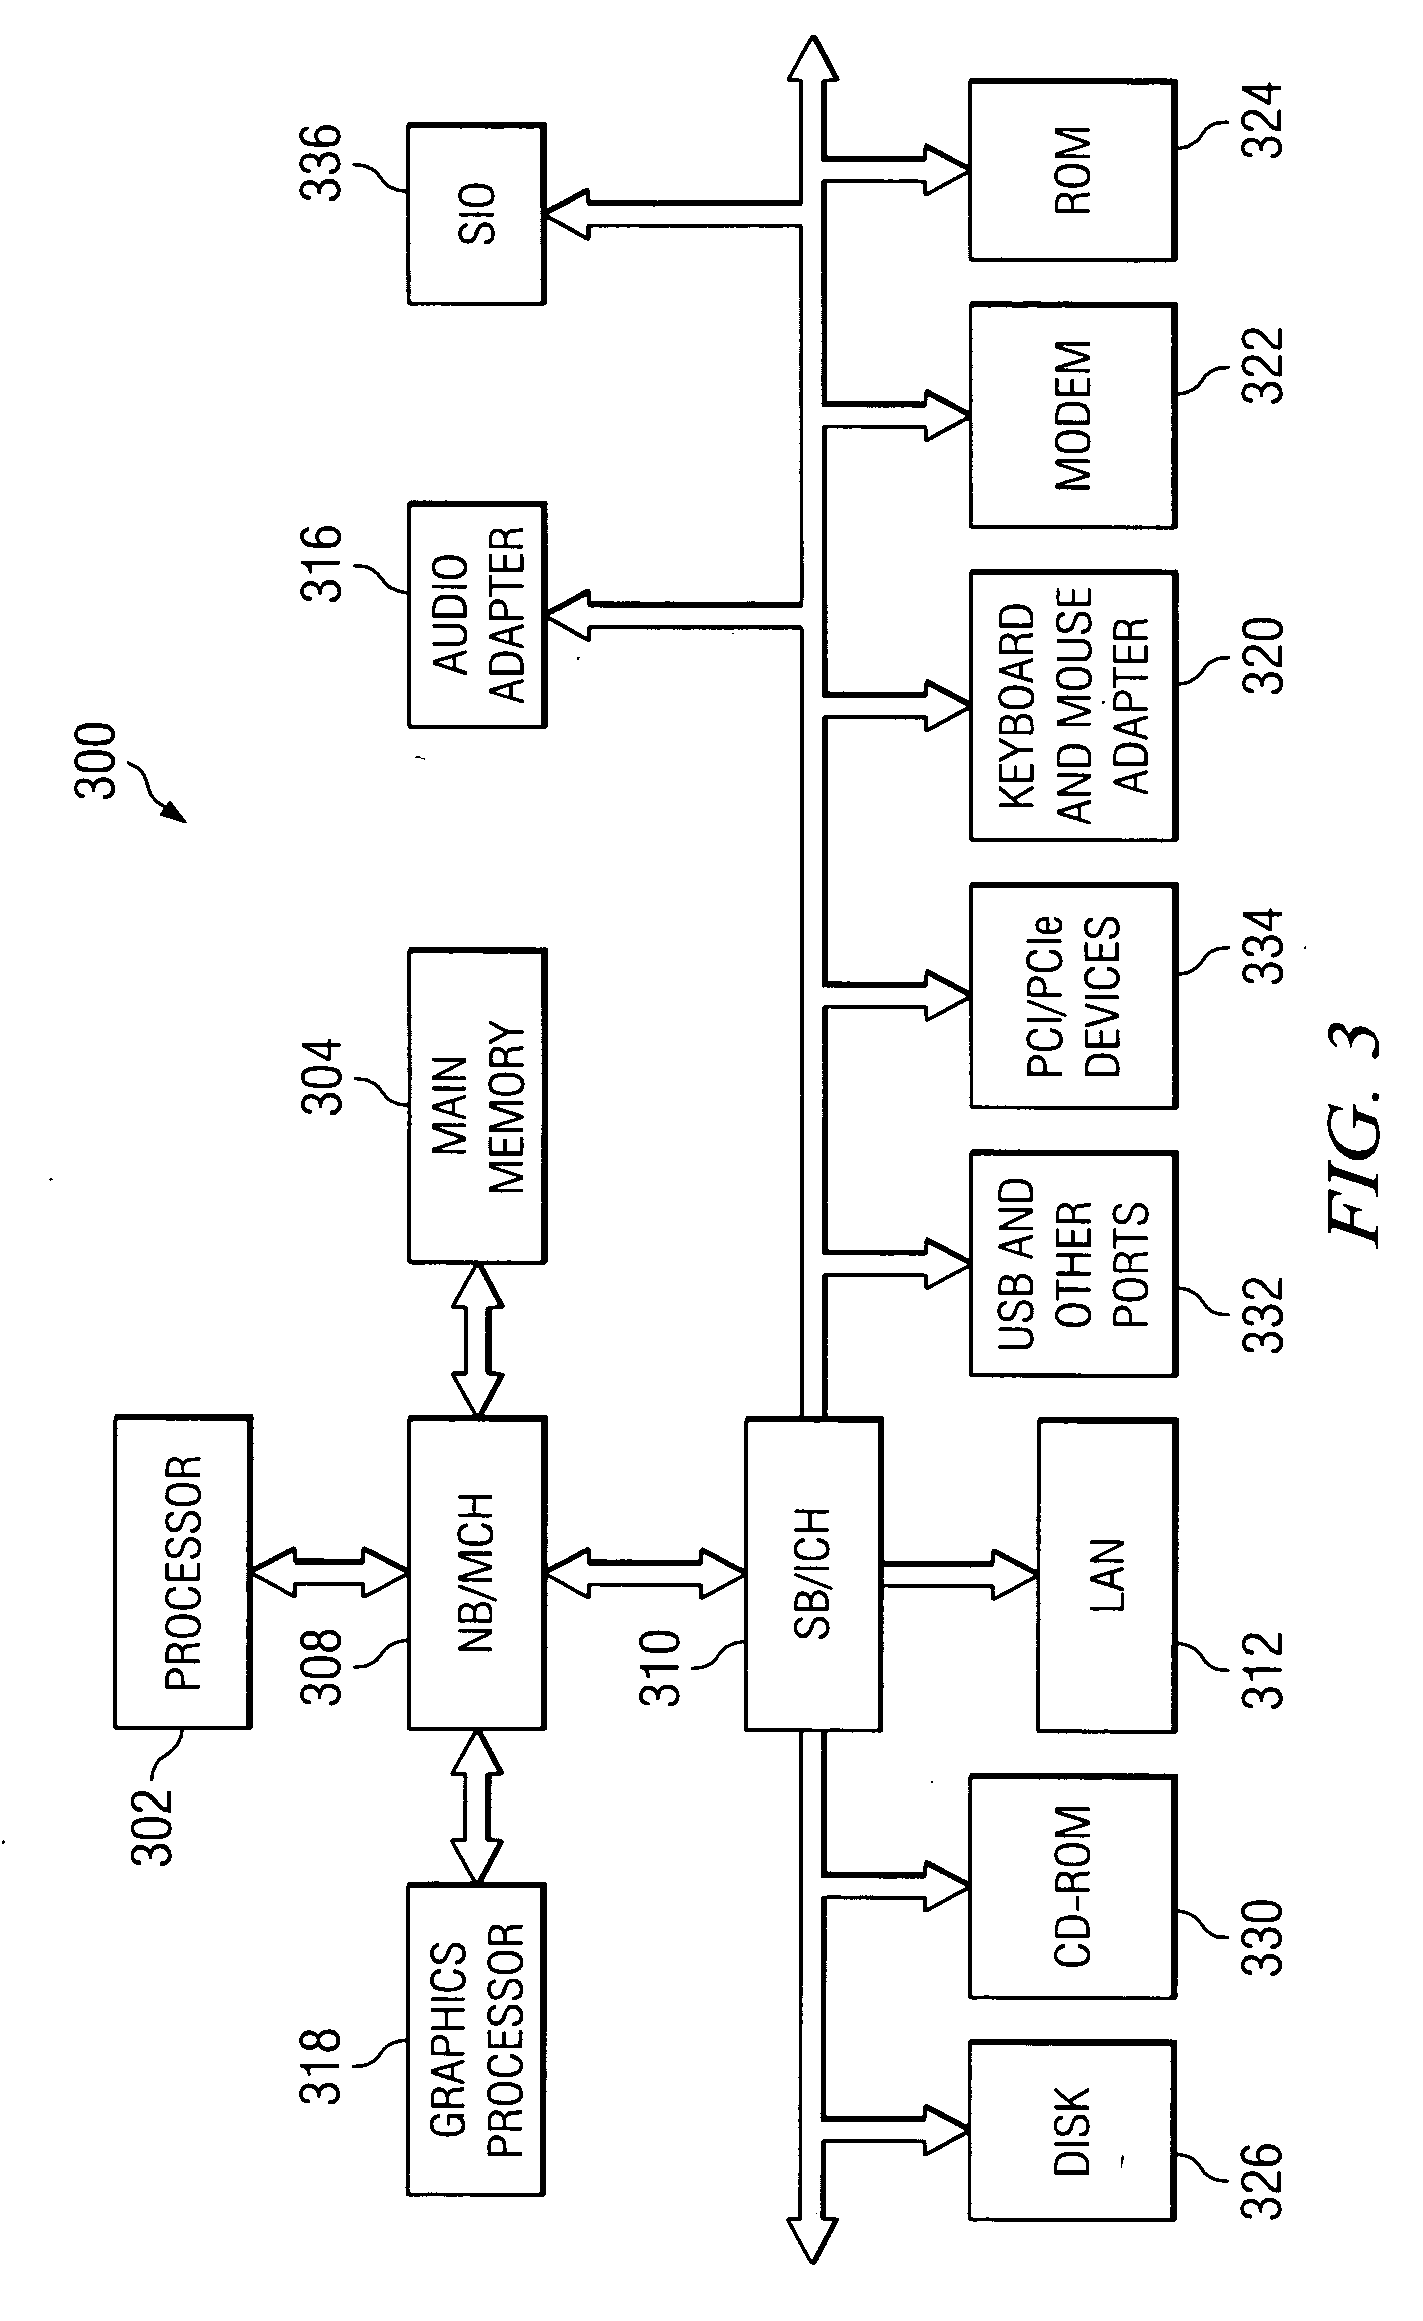 Method and apparatus for combining resource properties and device operations using stateful Web services